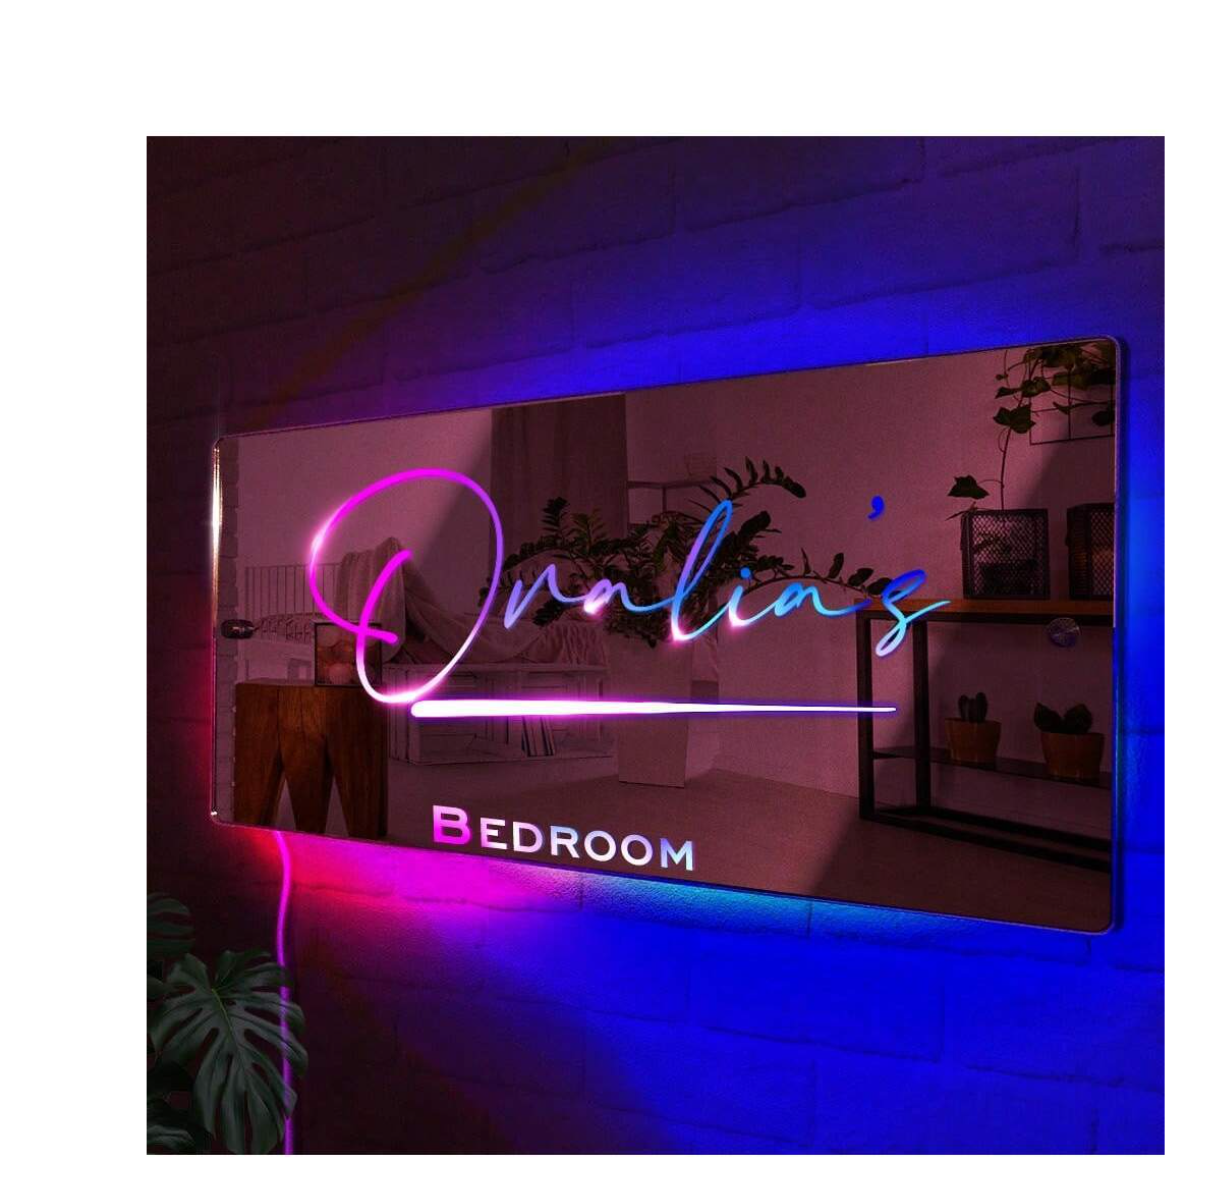 Luminous Elegance: Personalized Name LED Light Mirror - Modern Wall Decor Night Lamp for a Tailored Touch in Bedrooms and Living Rooms! 🌟✨ #CustomizedLightMagic